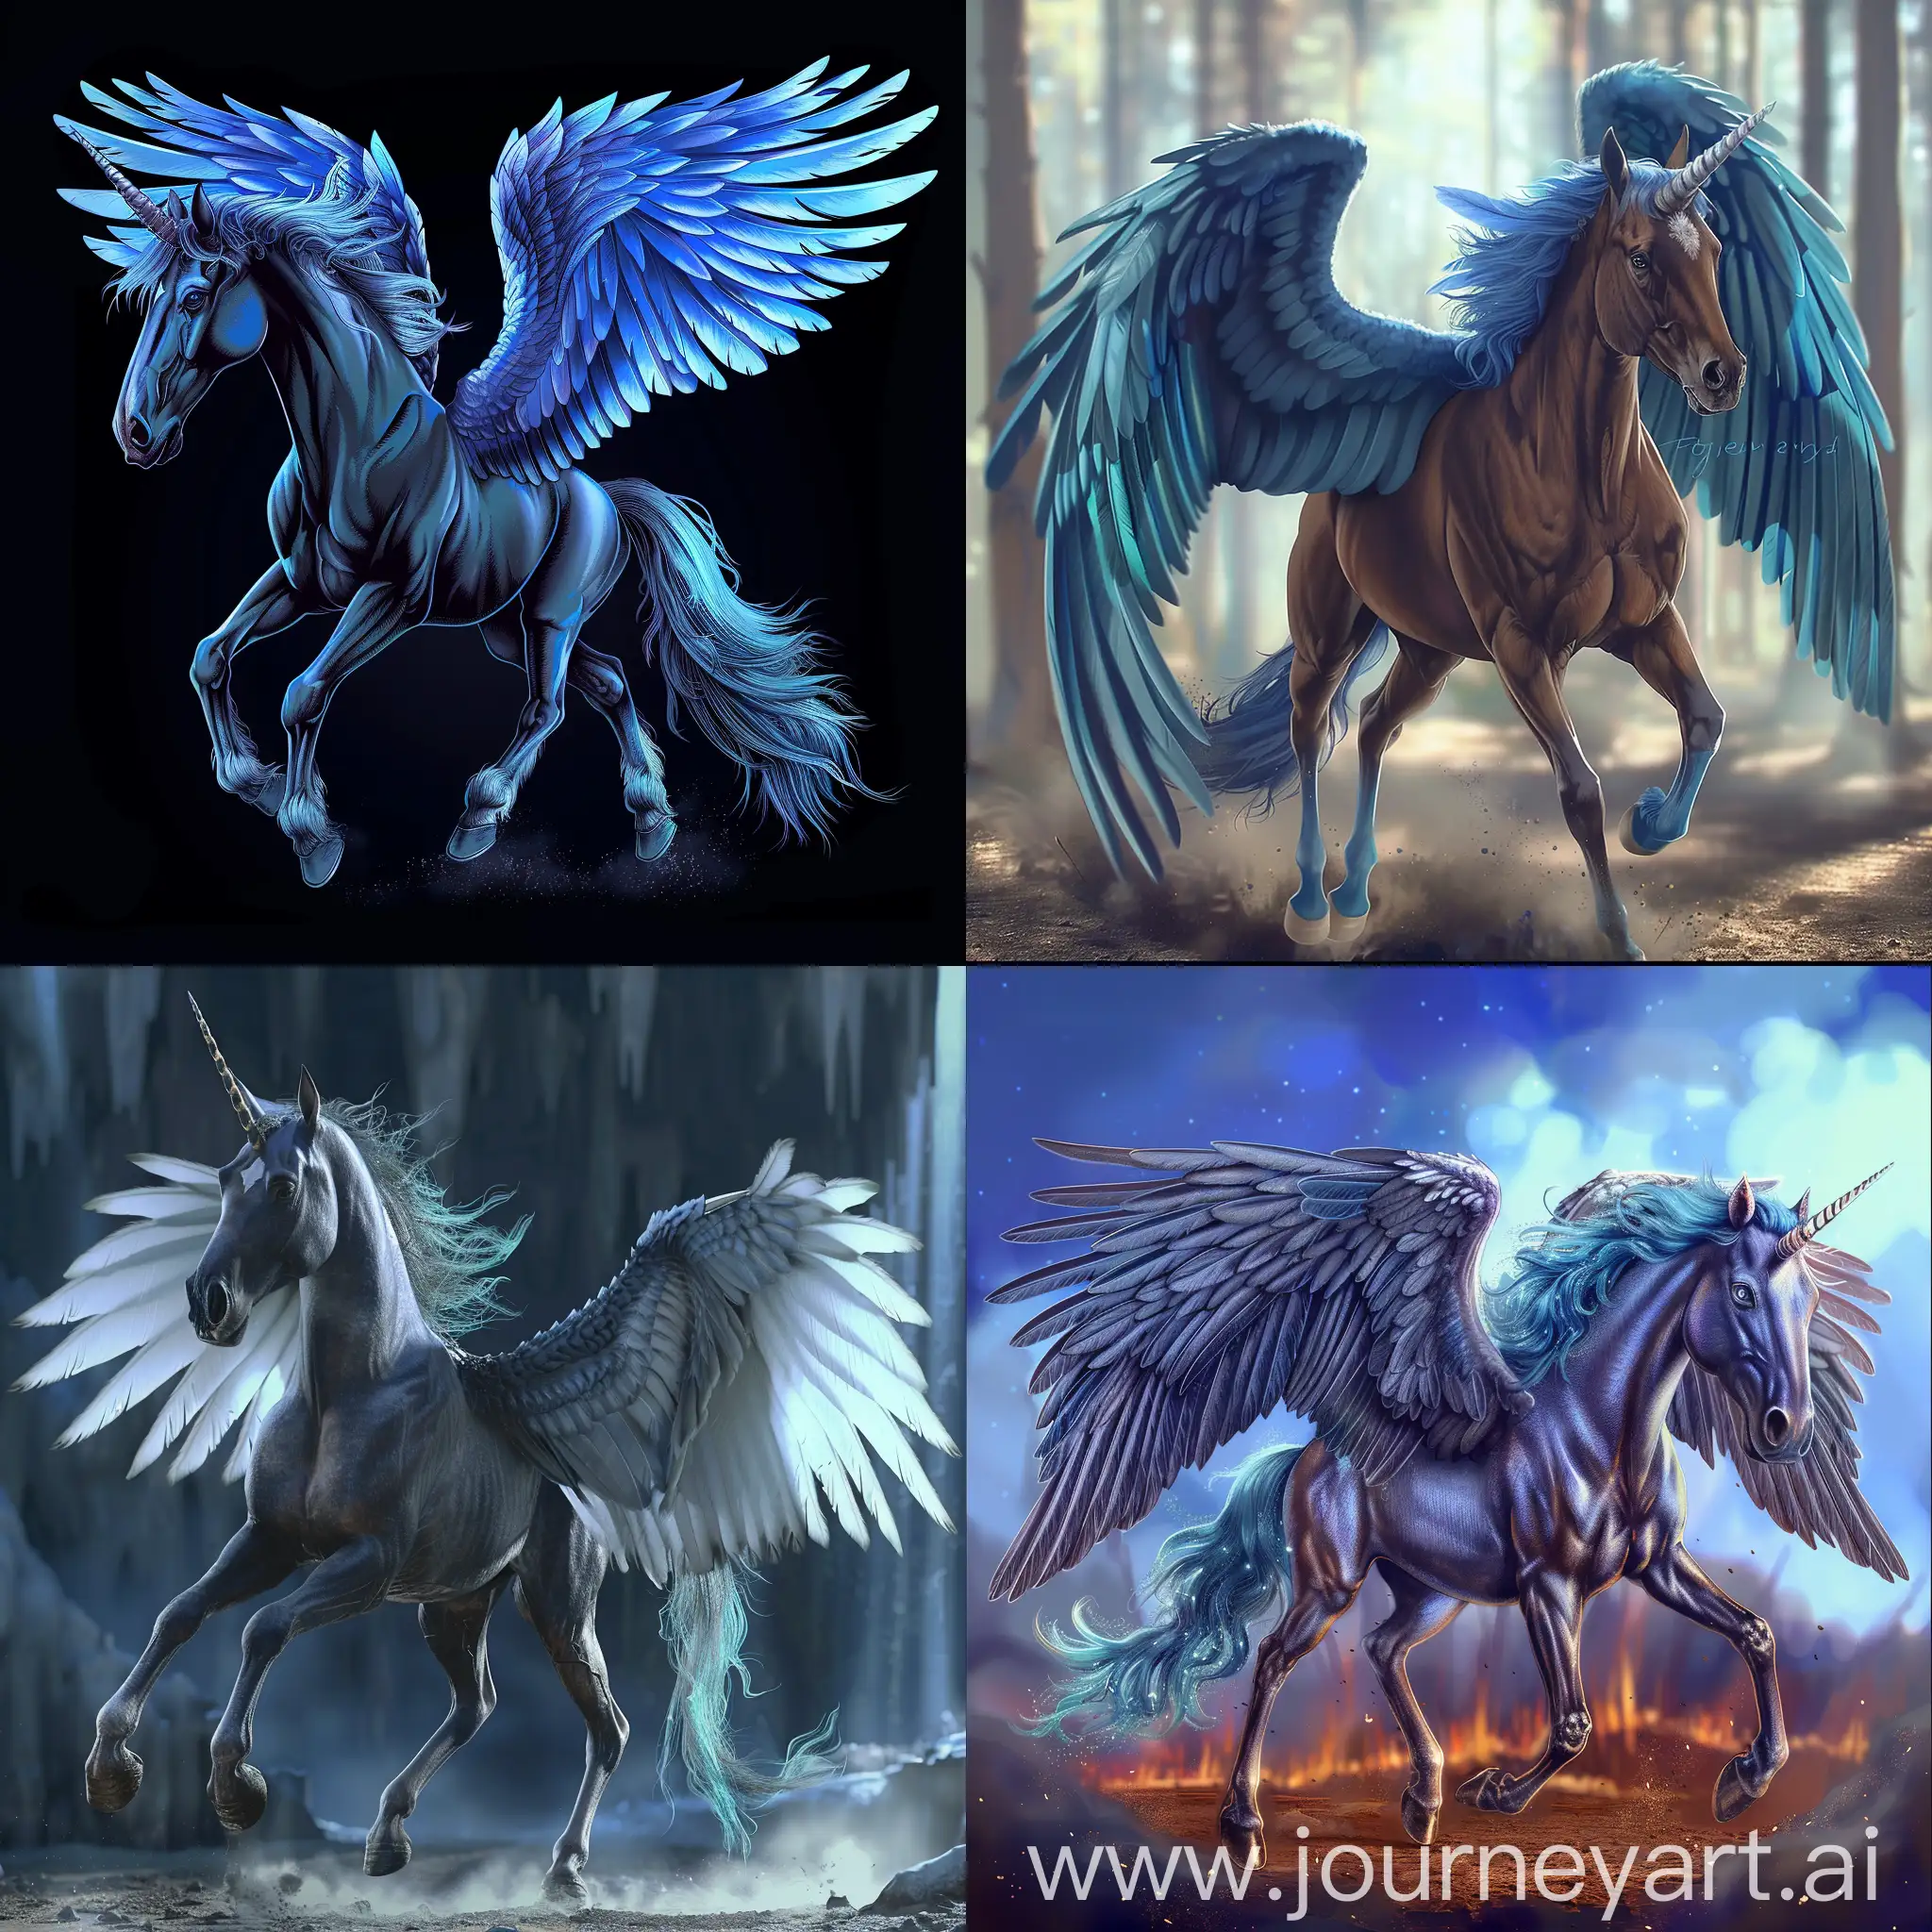 Pegasus, a powerful beautiful horse with spread wings, blue color, dramatic